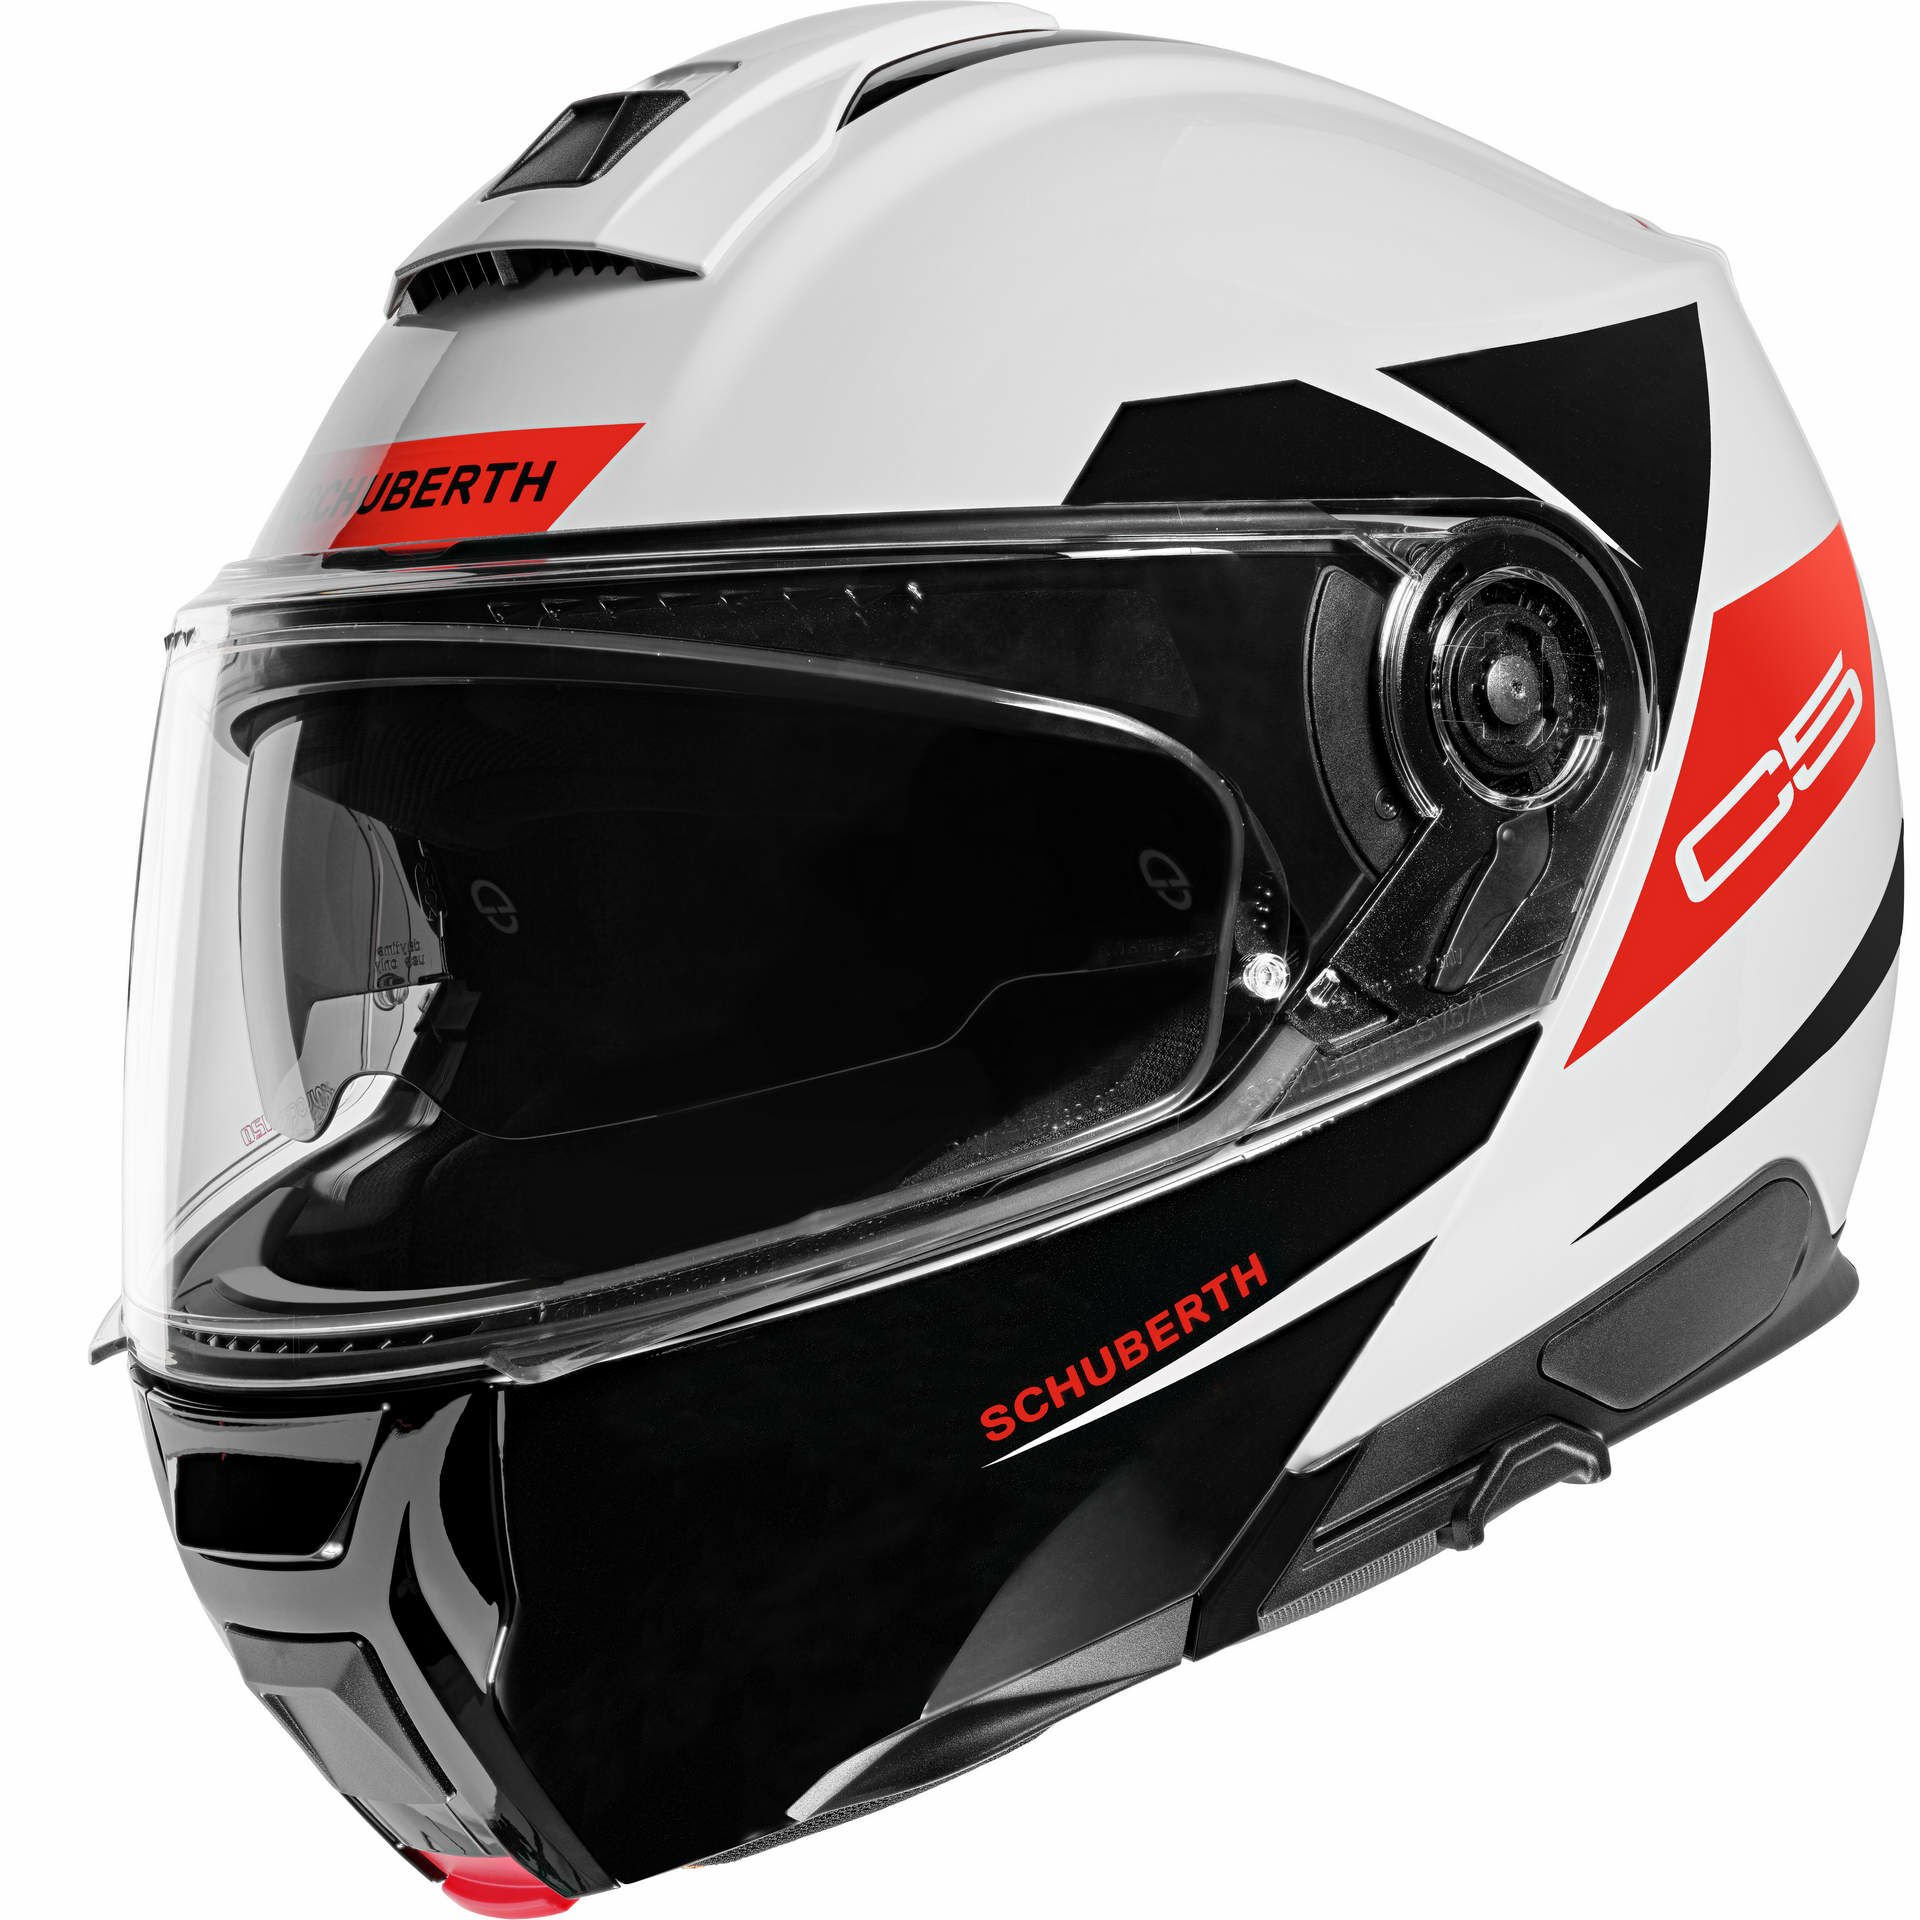 SCHUBERTH C5 ECLIPSE RED KASK